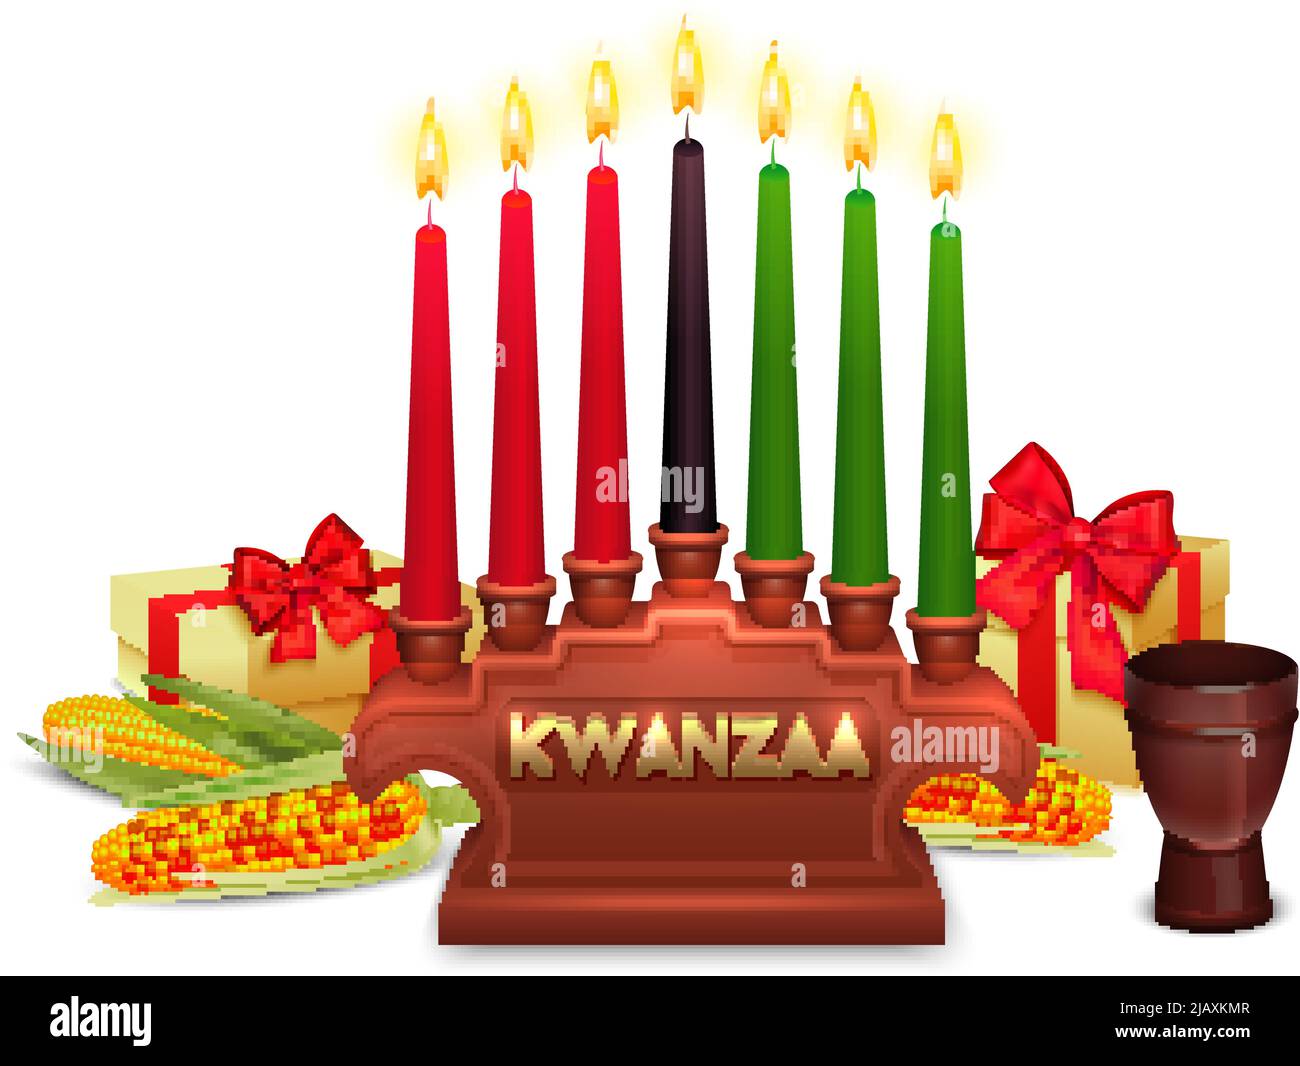 African americans kwanzaa holiday symbols composition poster with candles holder traditional presents corn ears and colors vector illustration Stock Vector